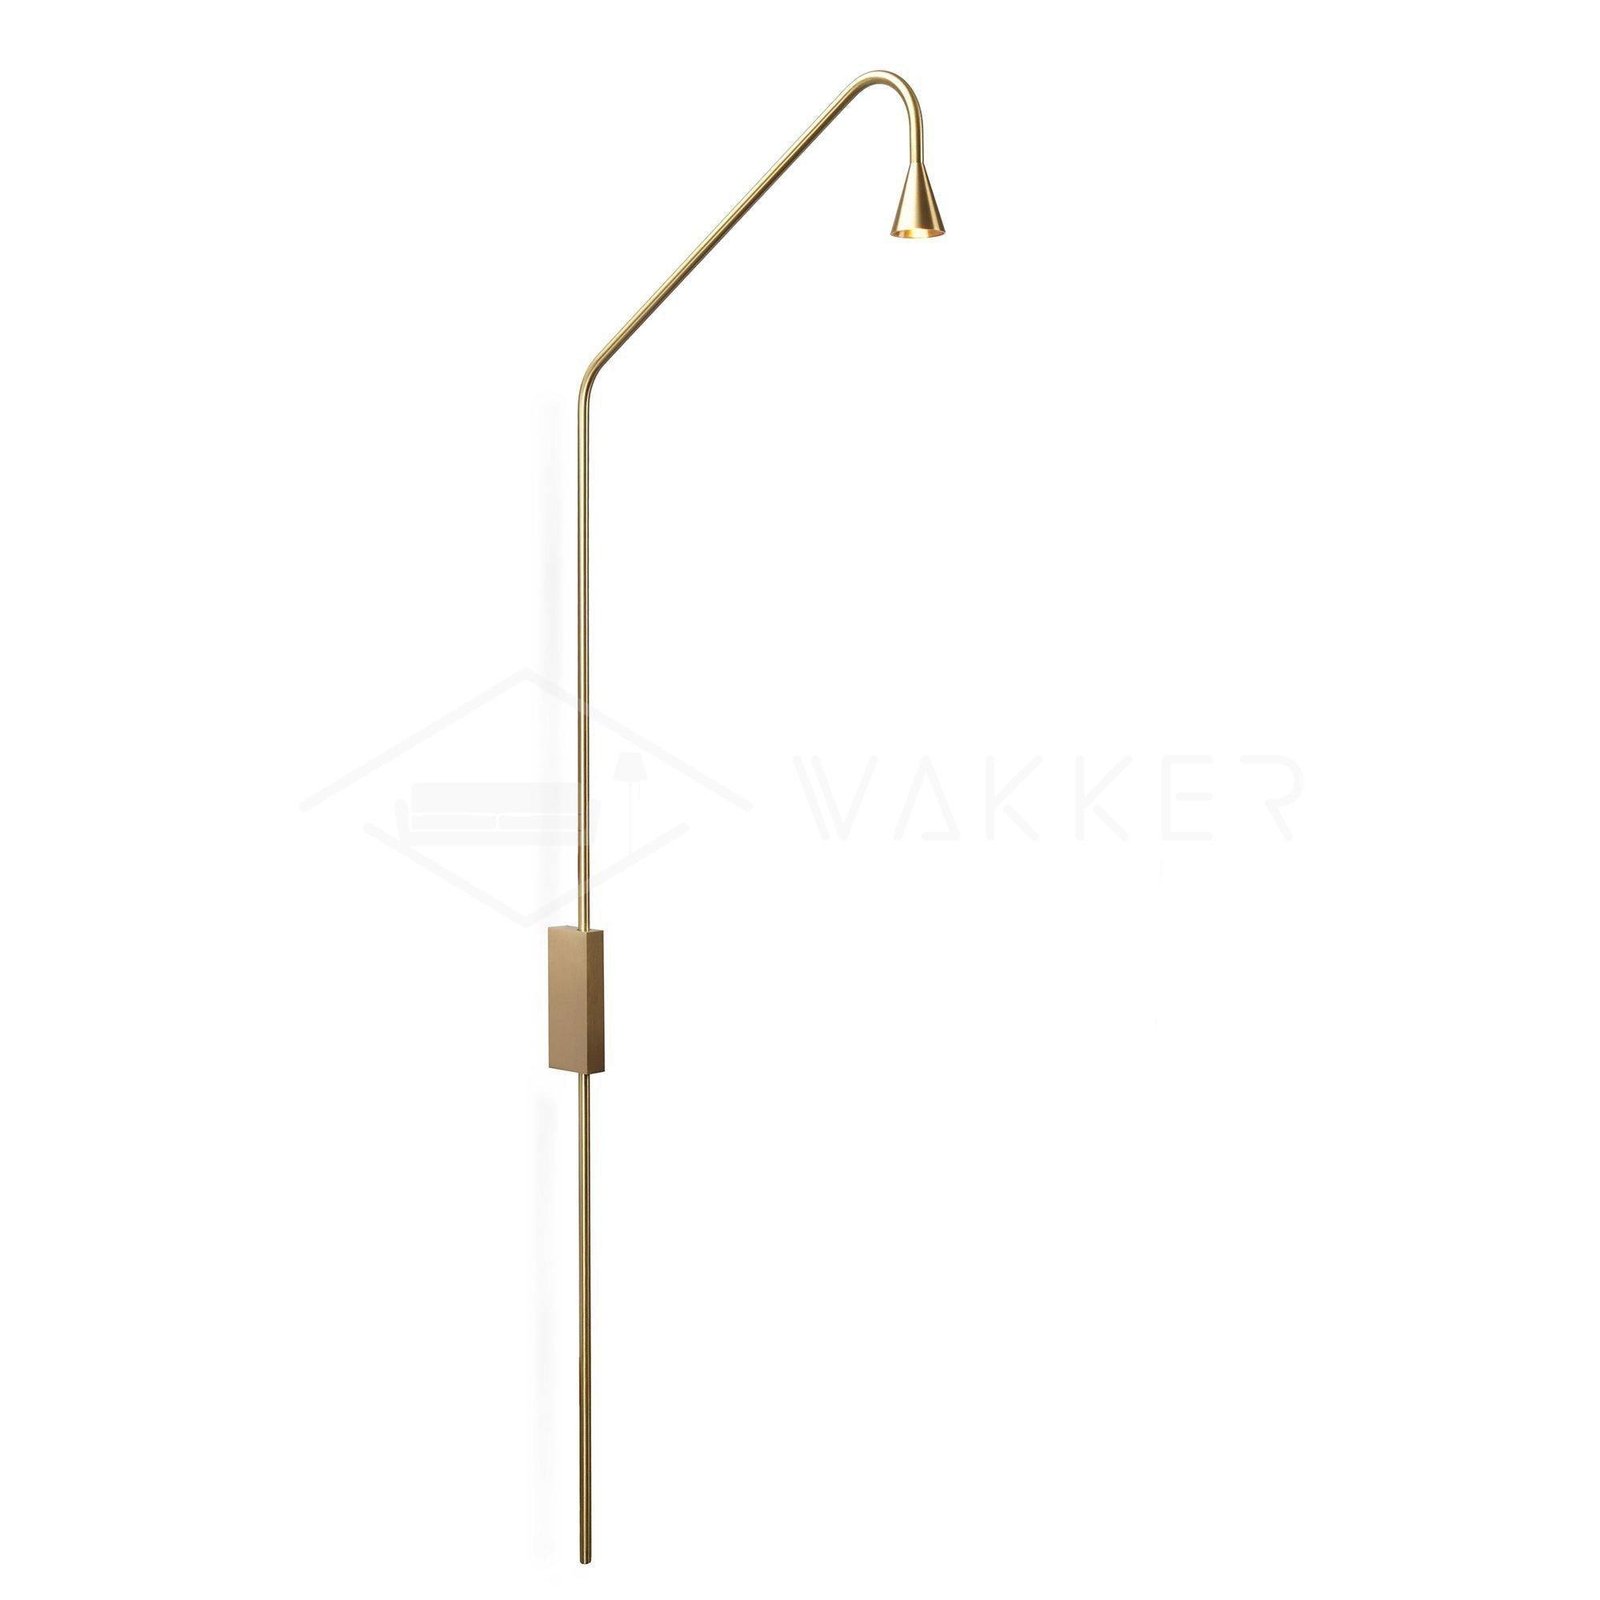 Austere Wall Sconce with Golden UK Plug, 45cm Diameter and 115cm Height (Set of 2)